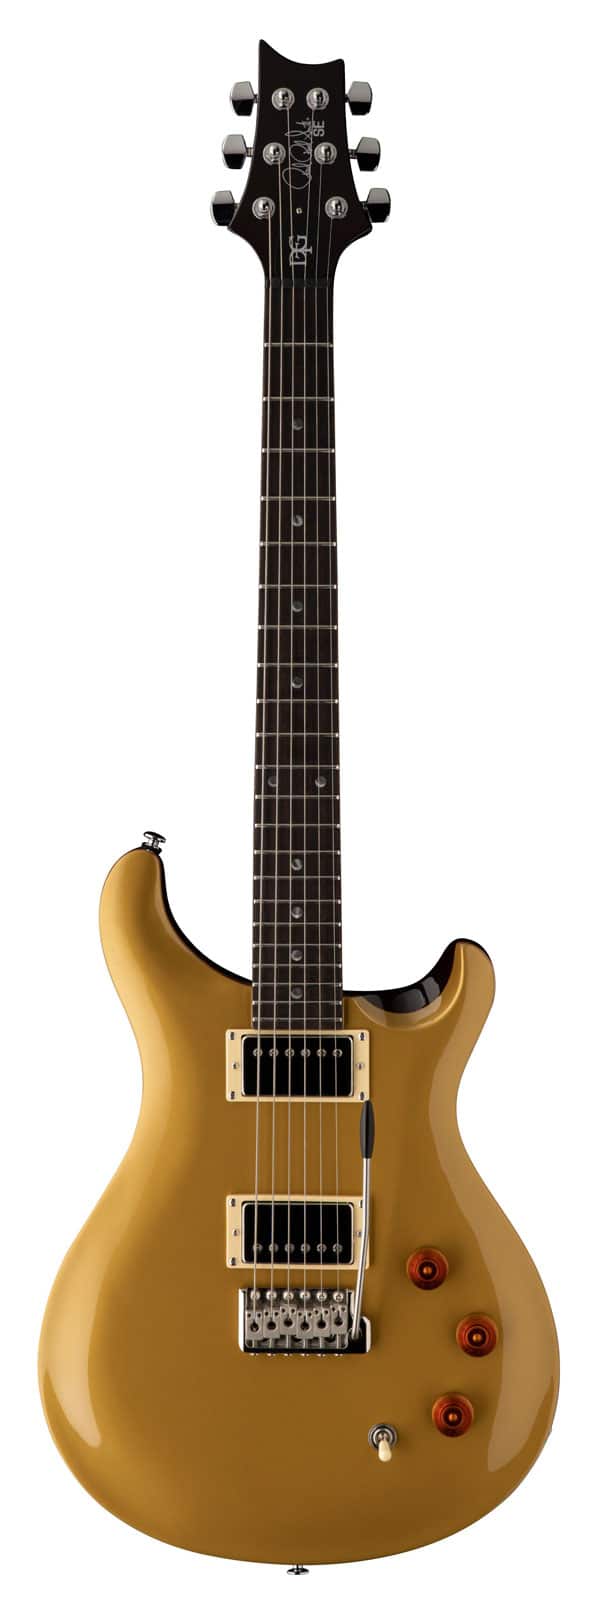 PRS - PAUL REED SMITH SE DGT GOLD TOP - REFURBISHED